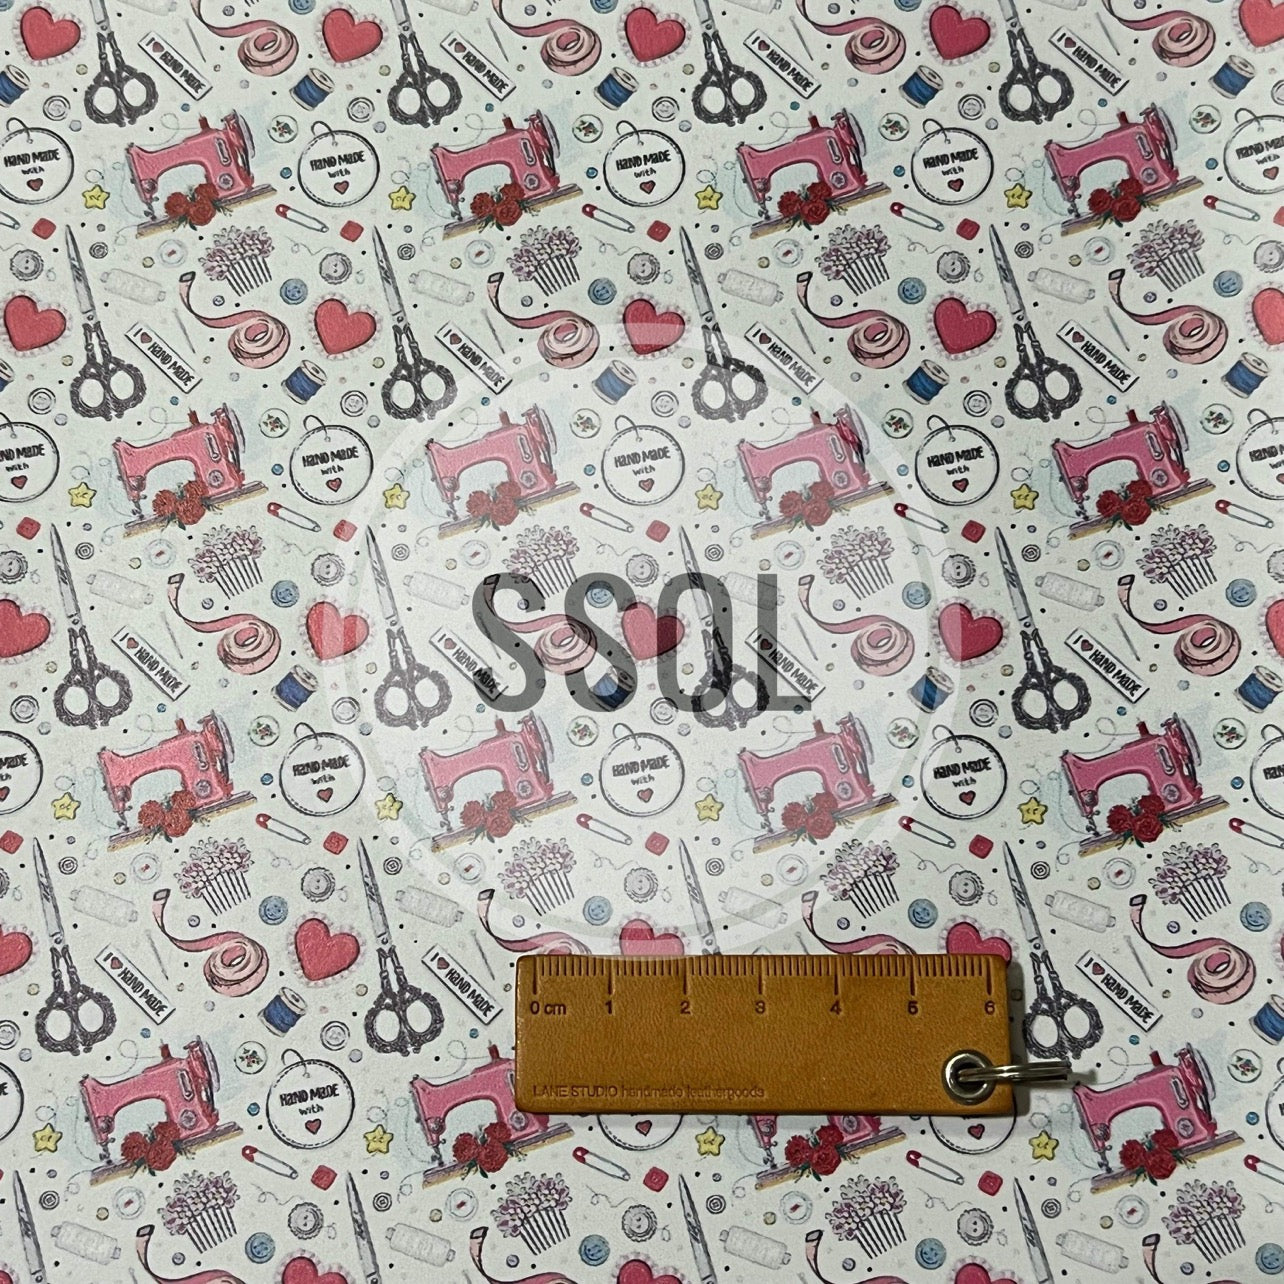 Vinyl/PU Leather - Sewing03